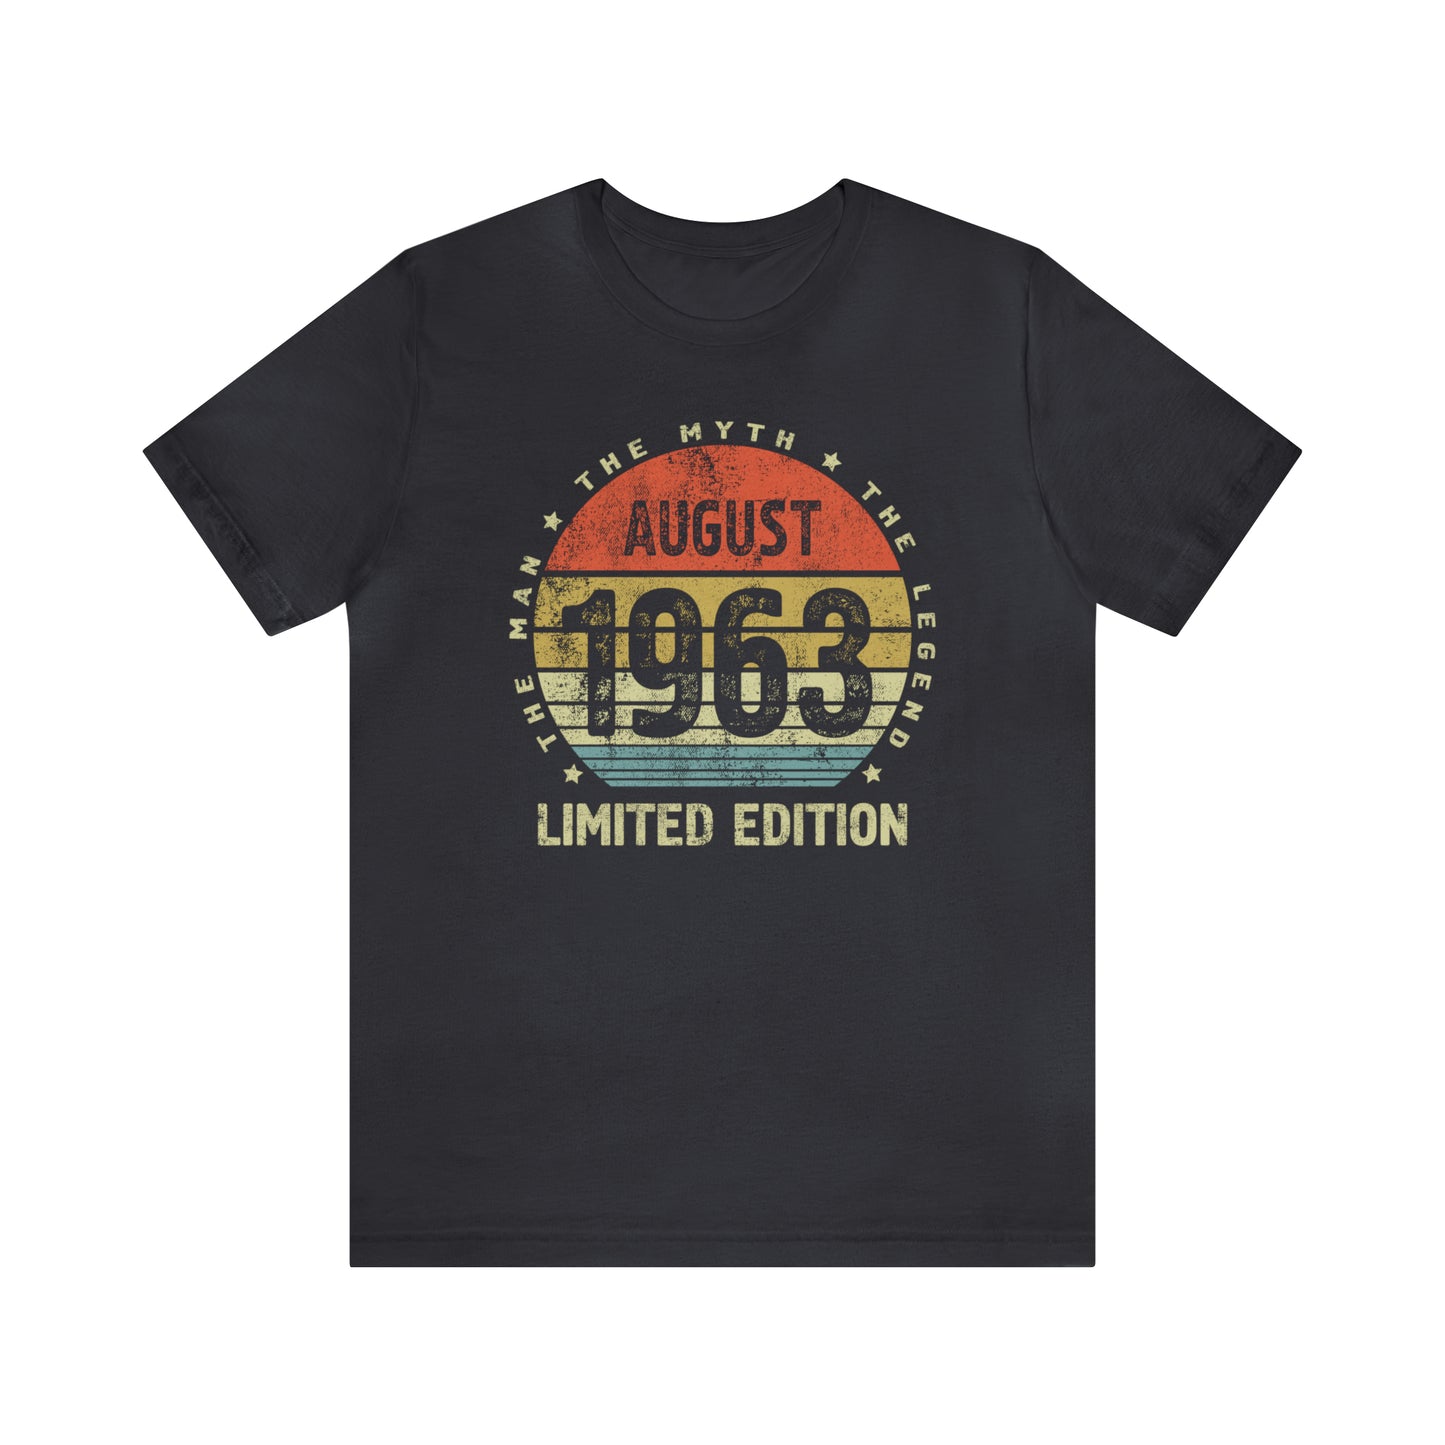 Vintage August 1963 birthday gift for men or dad, Gift shirt for father or brother, The Man The Myth The Legend